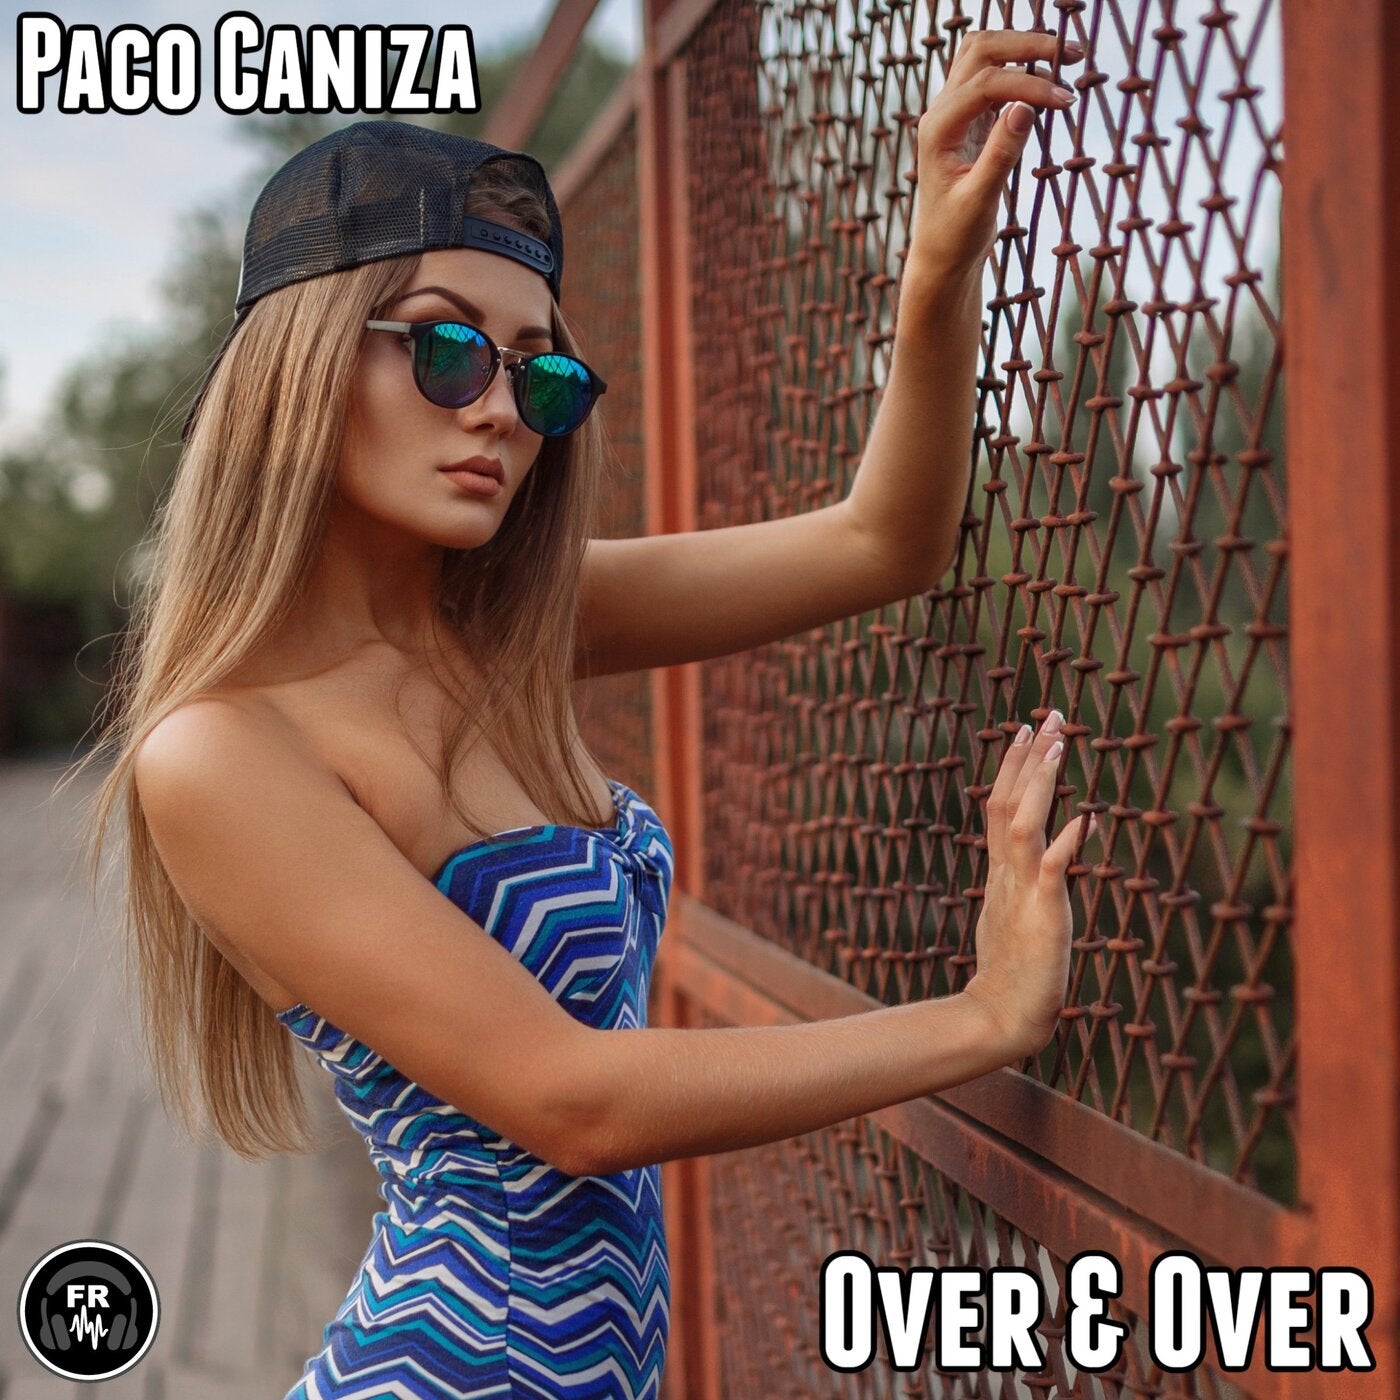 Paco Caniza from. Over funk